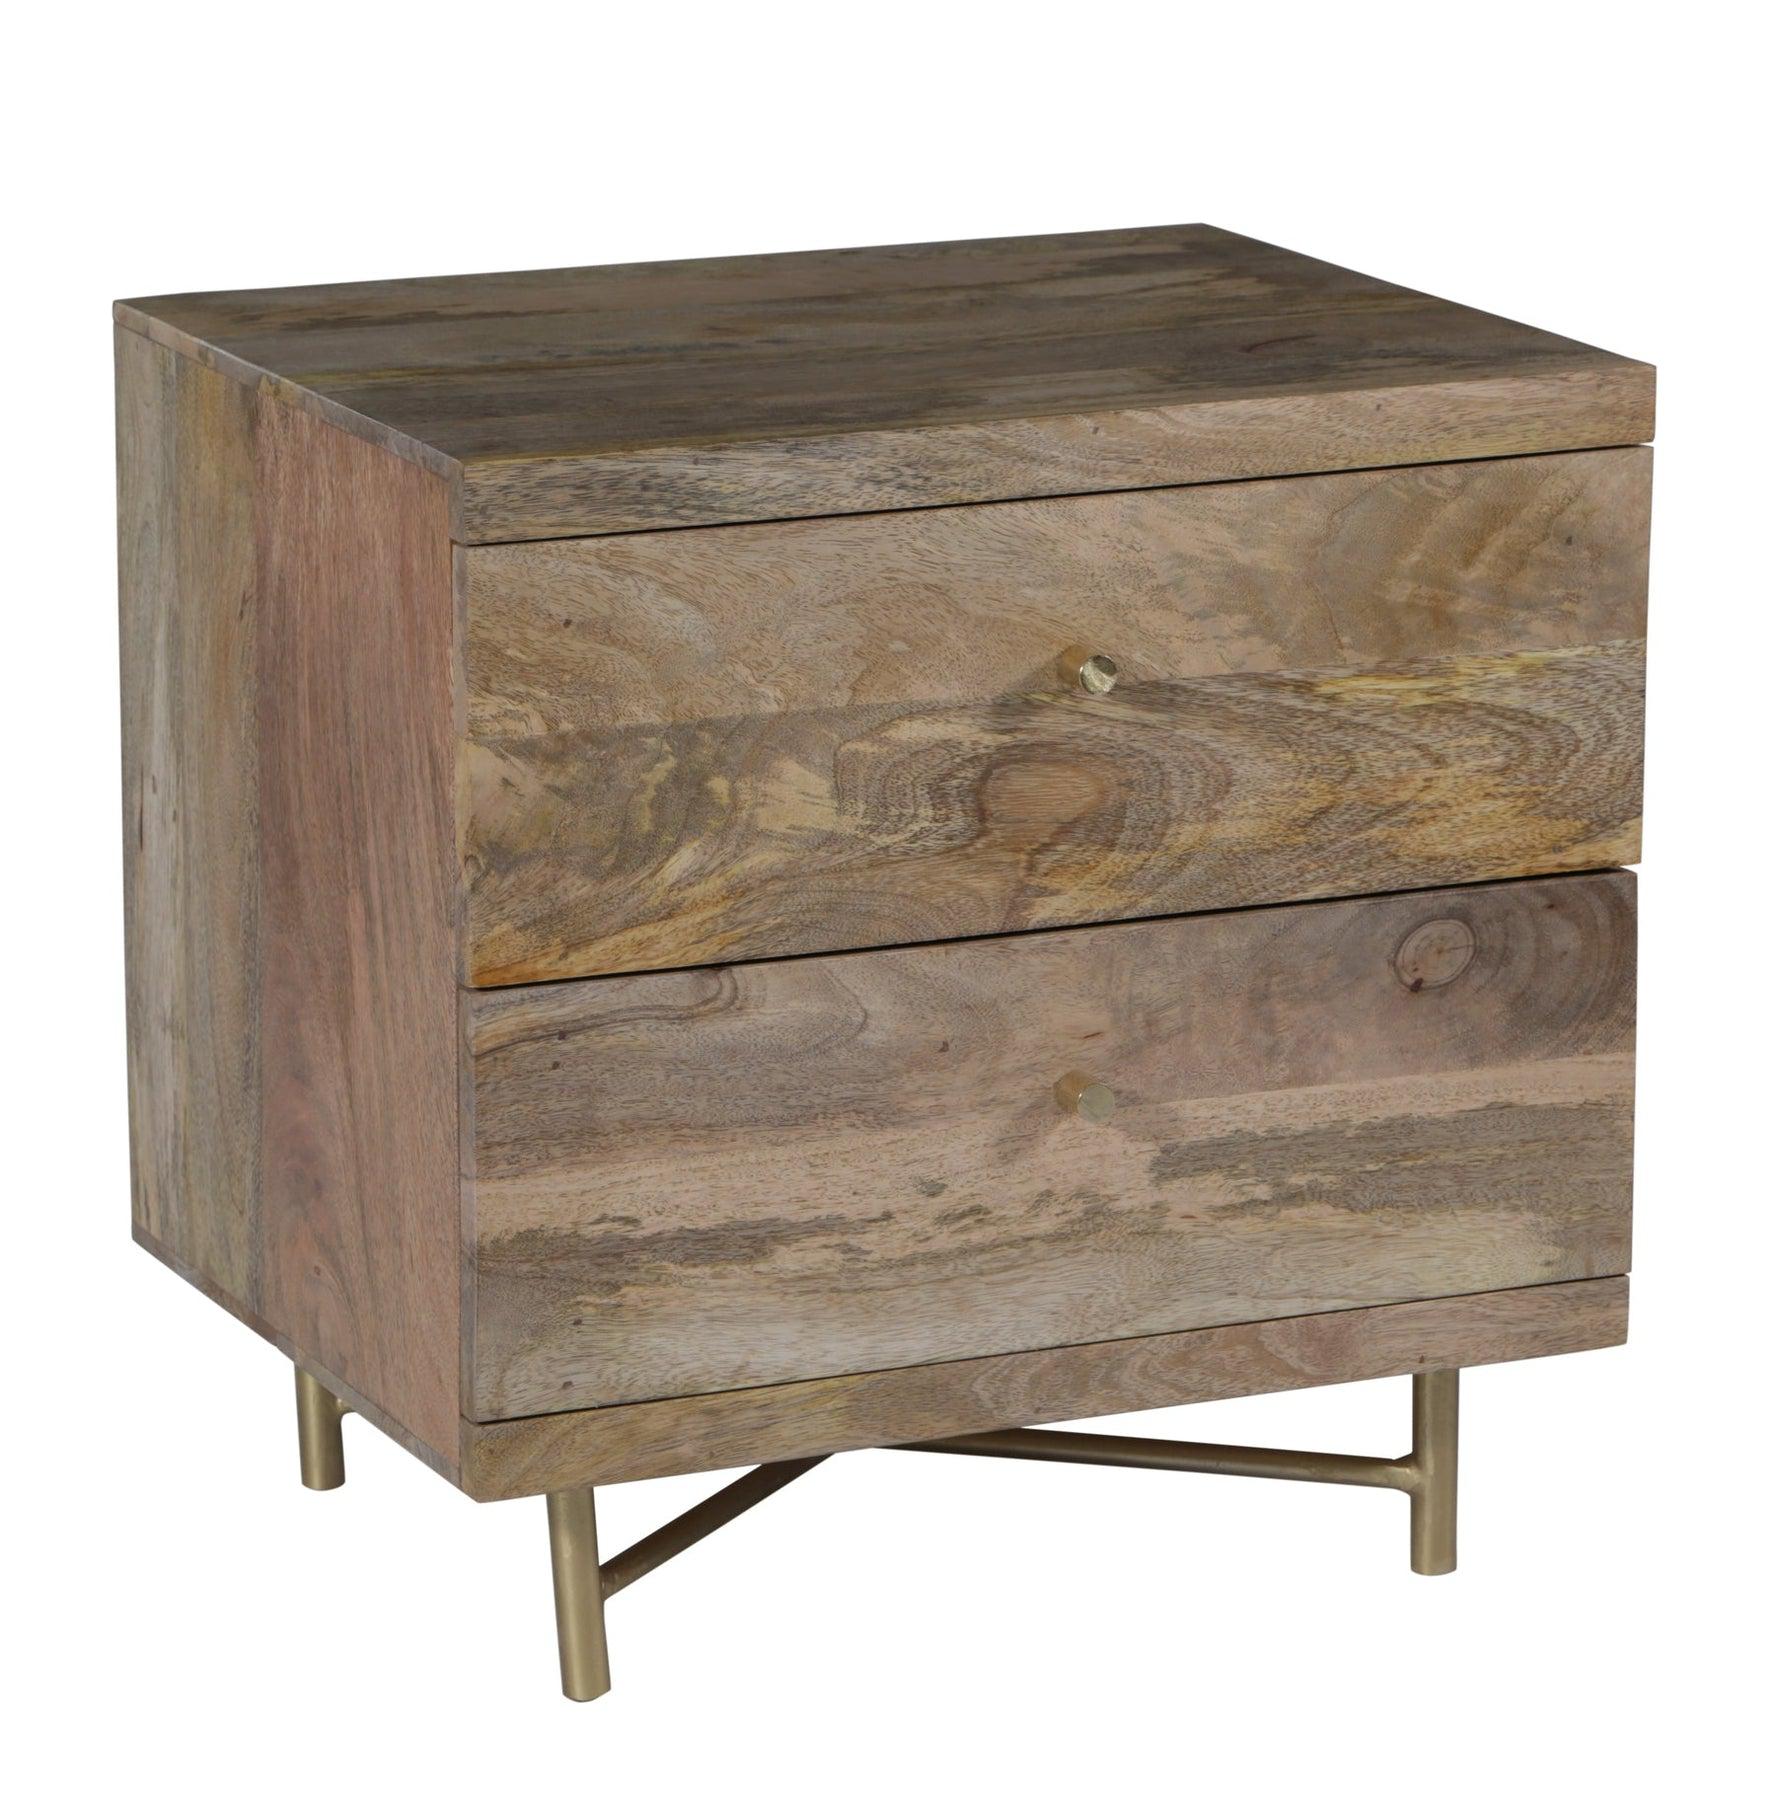 Wooden Ring Range 2 Drawer Bedside Table - Night Stand | 50x40x50 cm